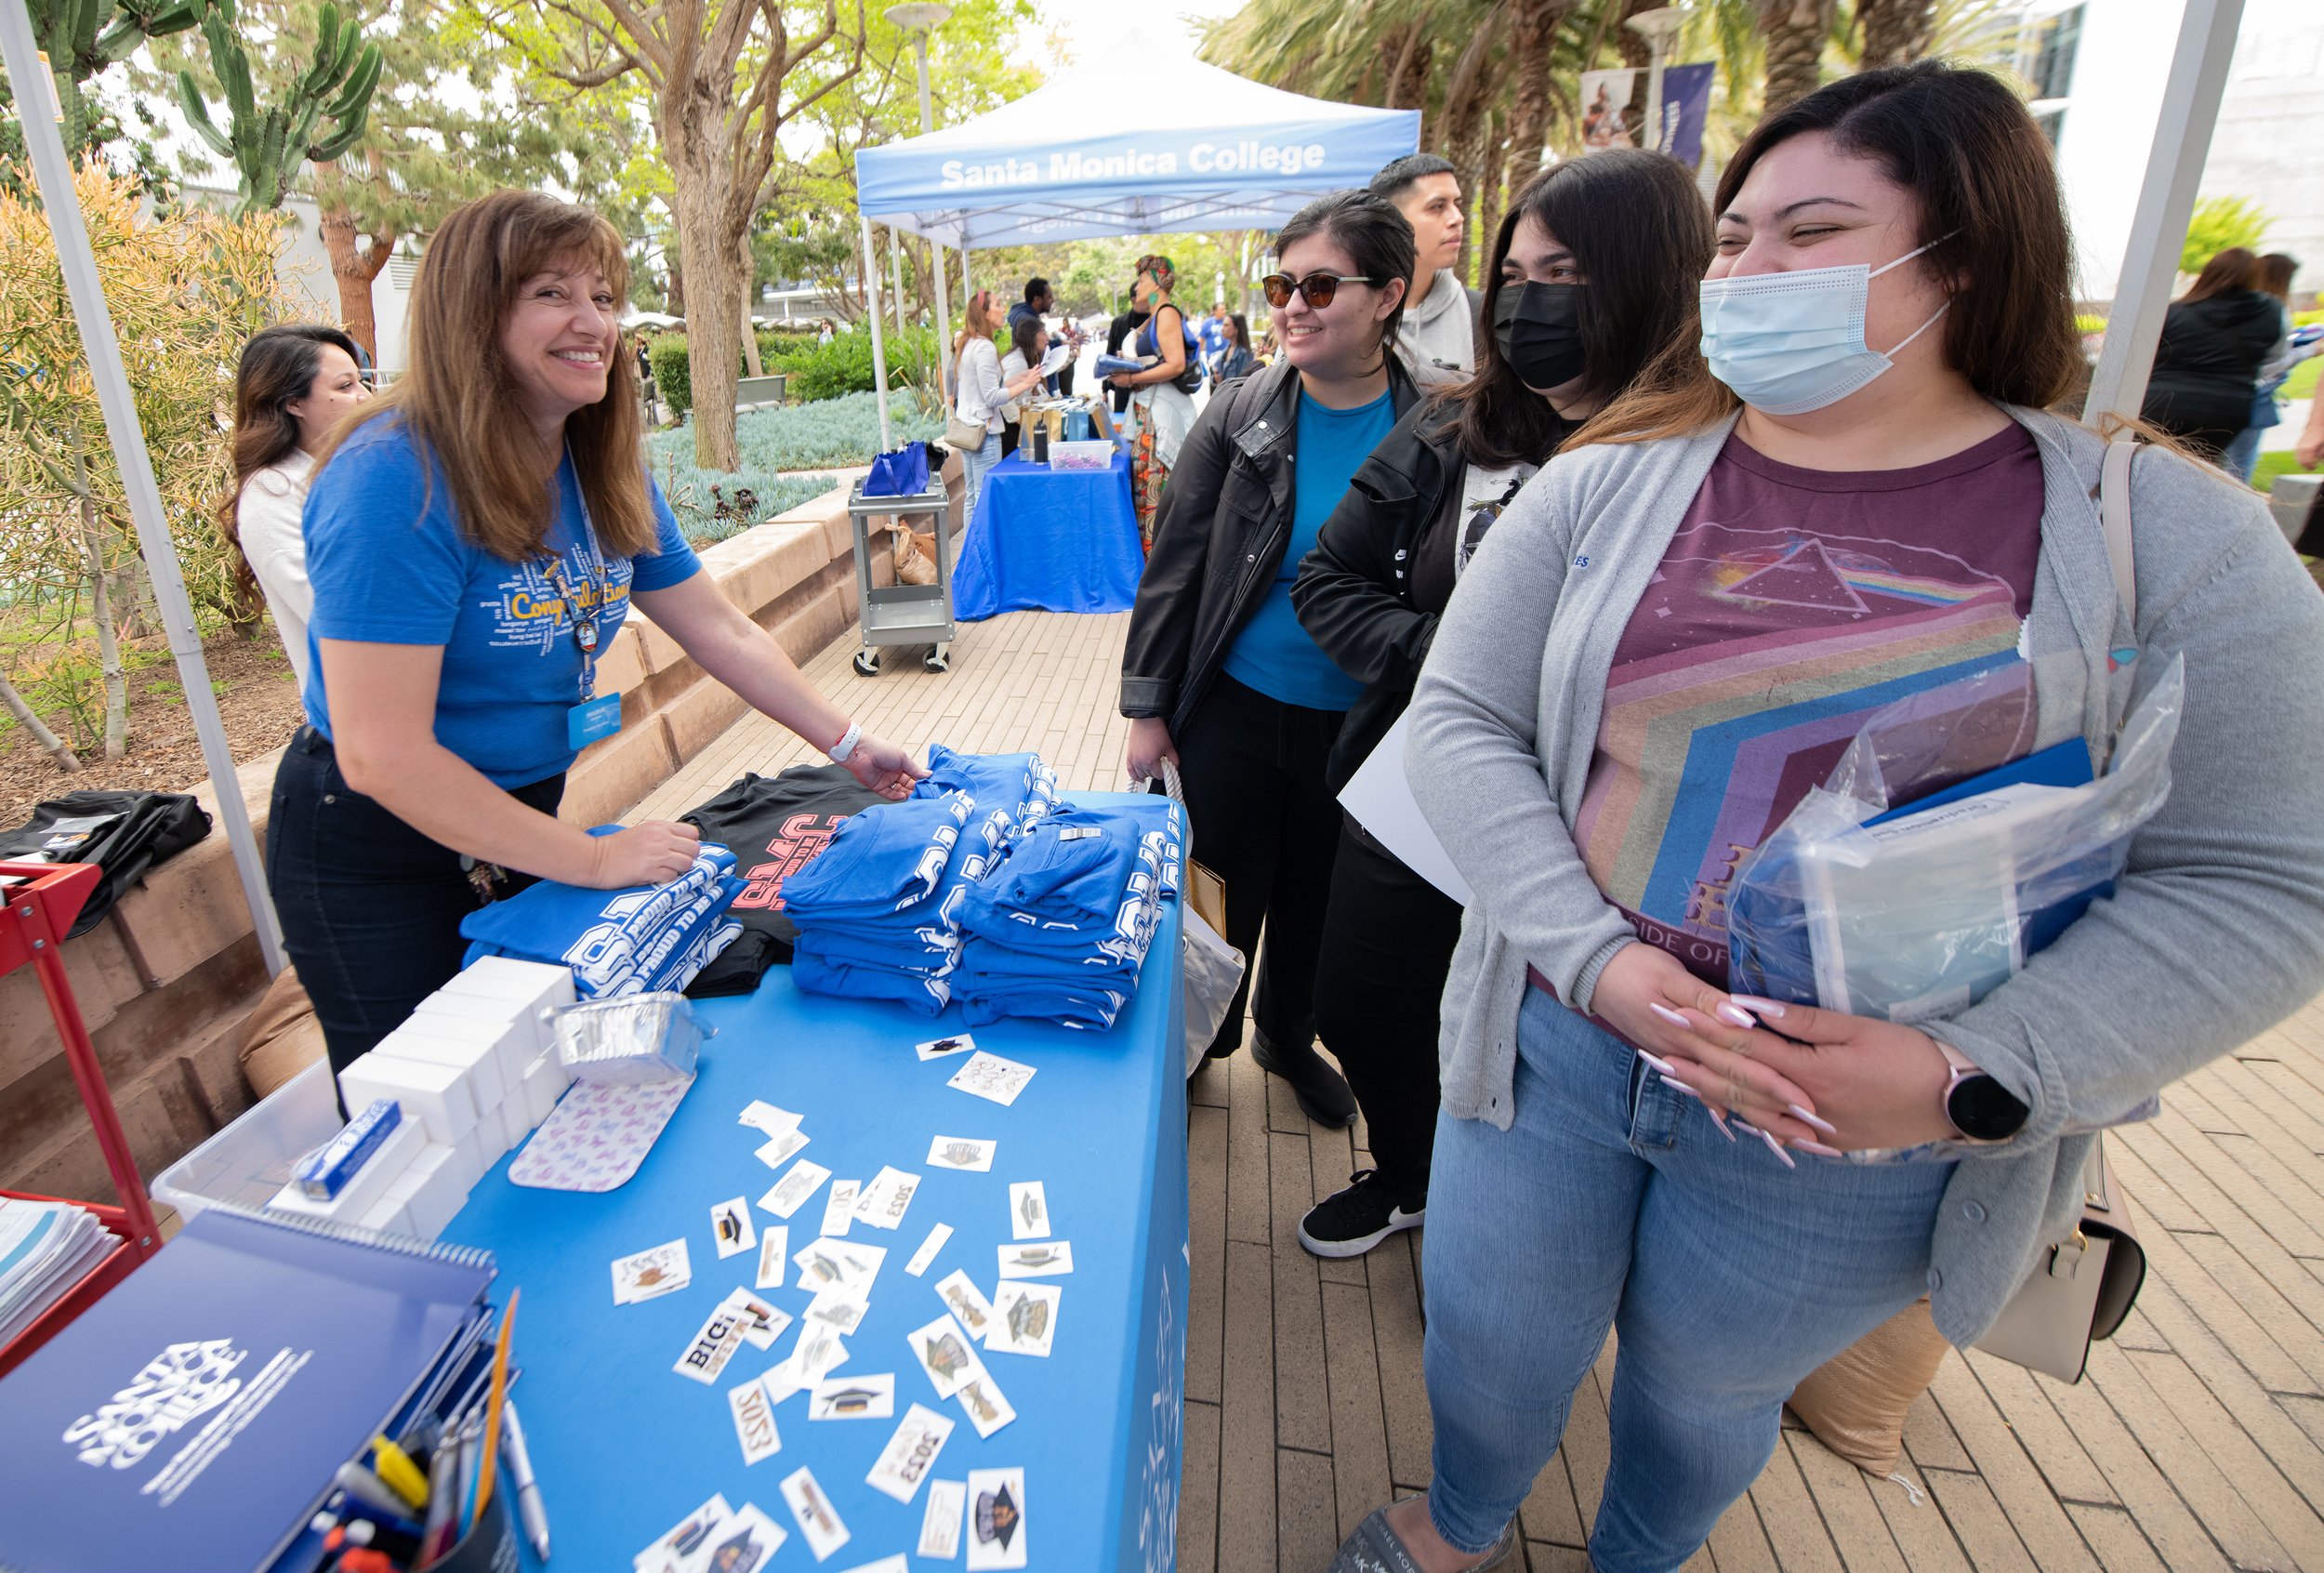  Students chose stickers and gear set up at Grad Fest Thursday, June 1 at Santa Monica College Main Quad ( Kevin Tidmore | TheCorsair ) 